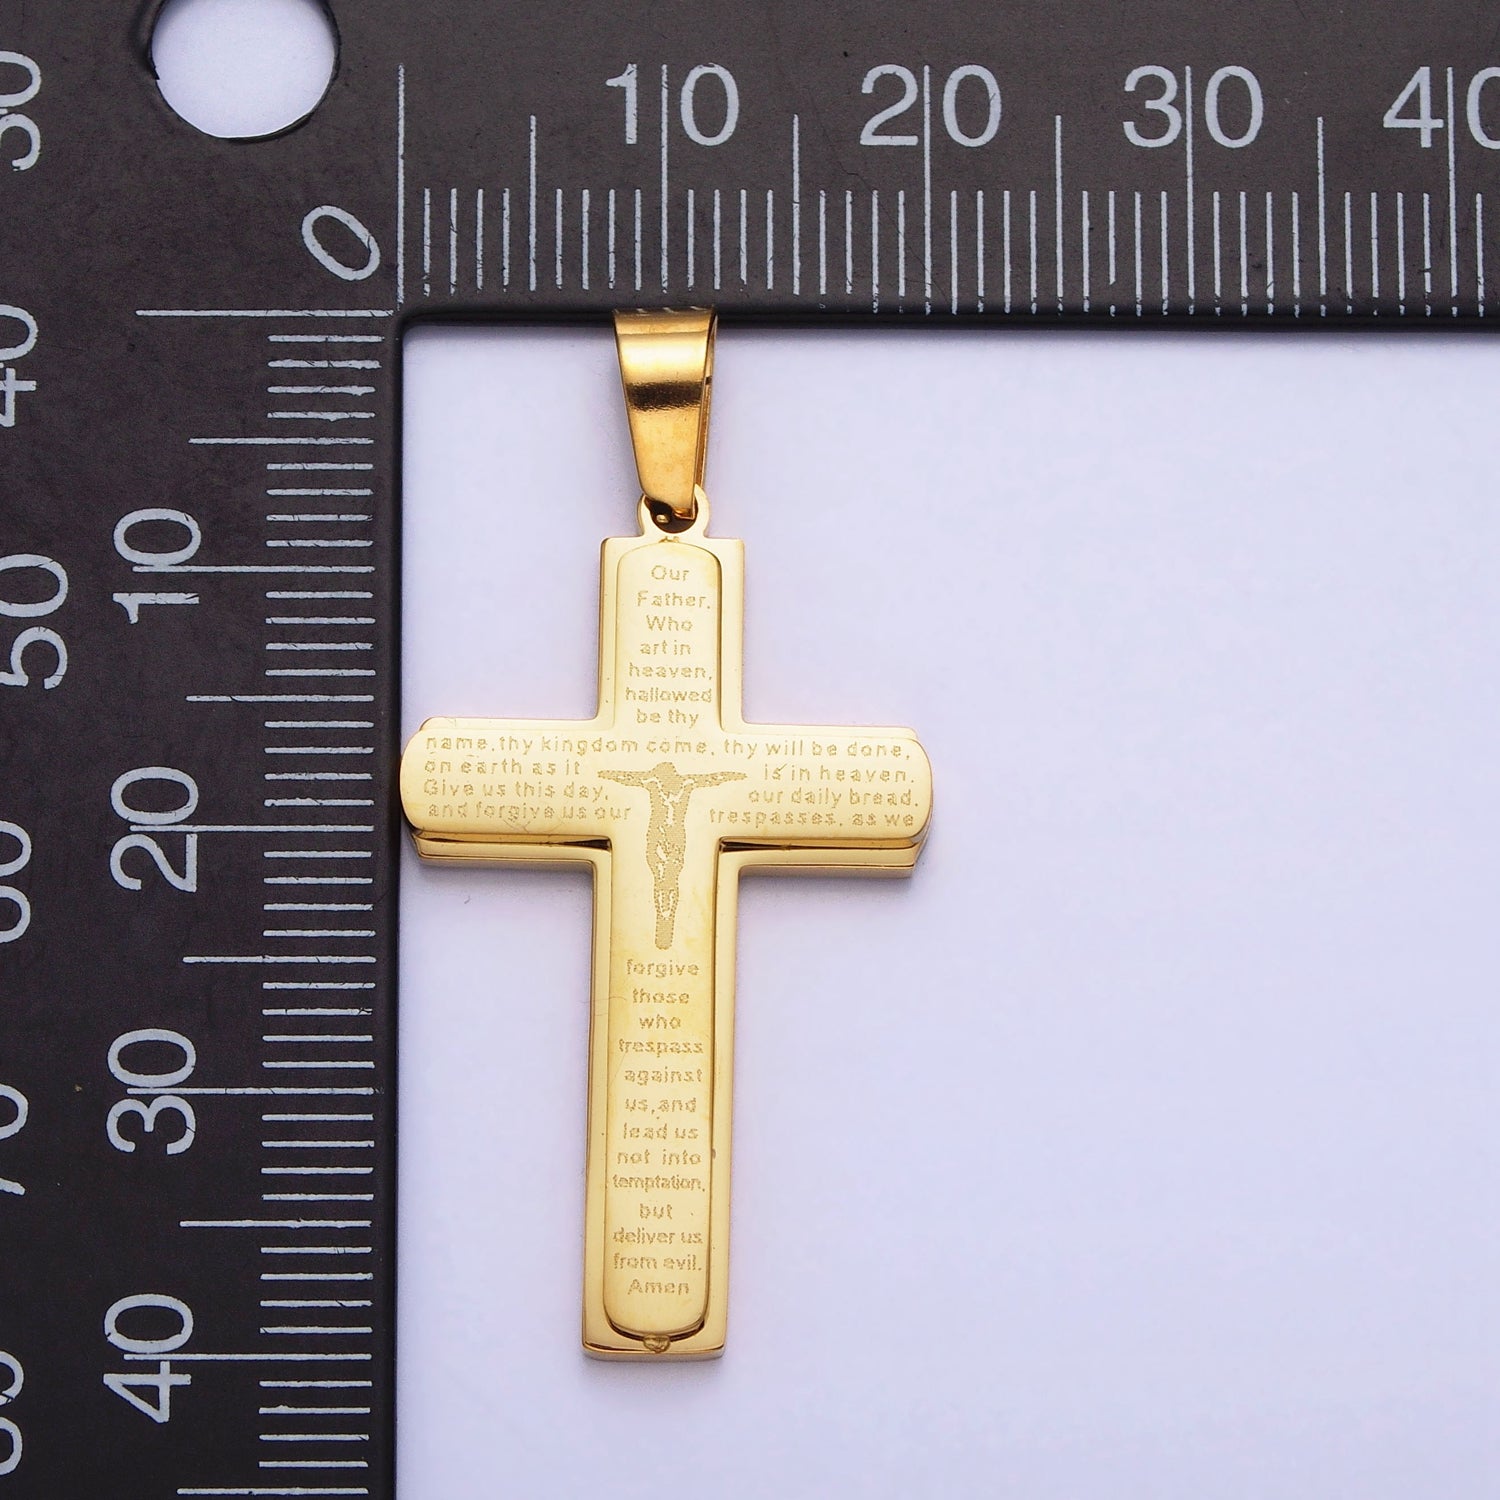 Lord Pray Pendant in Cross Charm 24K Gold Filled Engraved Our Father English Prayer Medallion for Religious Unisex Jewelry Making AB1368 AB1369 - DLUXCA